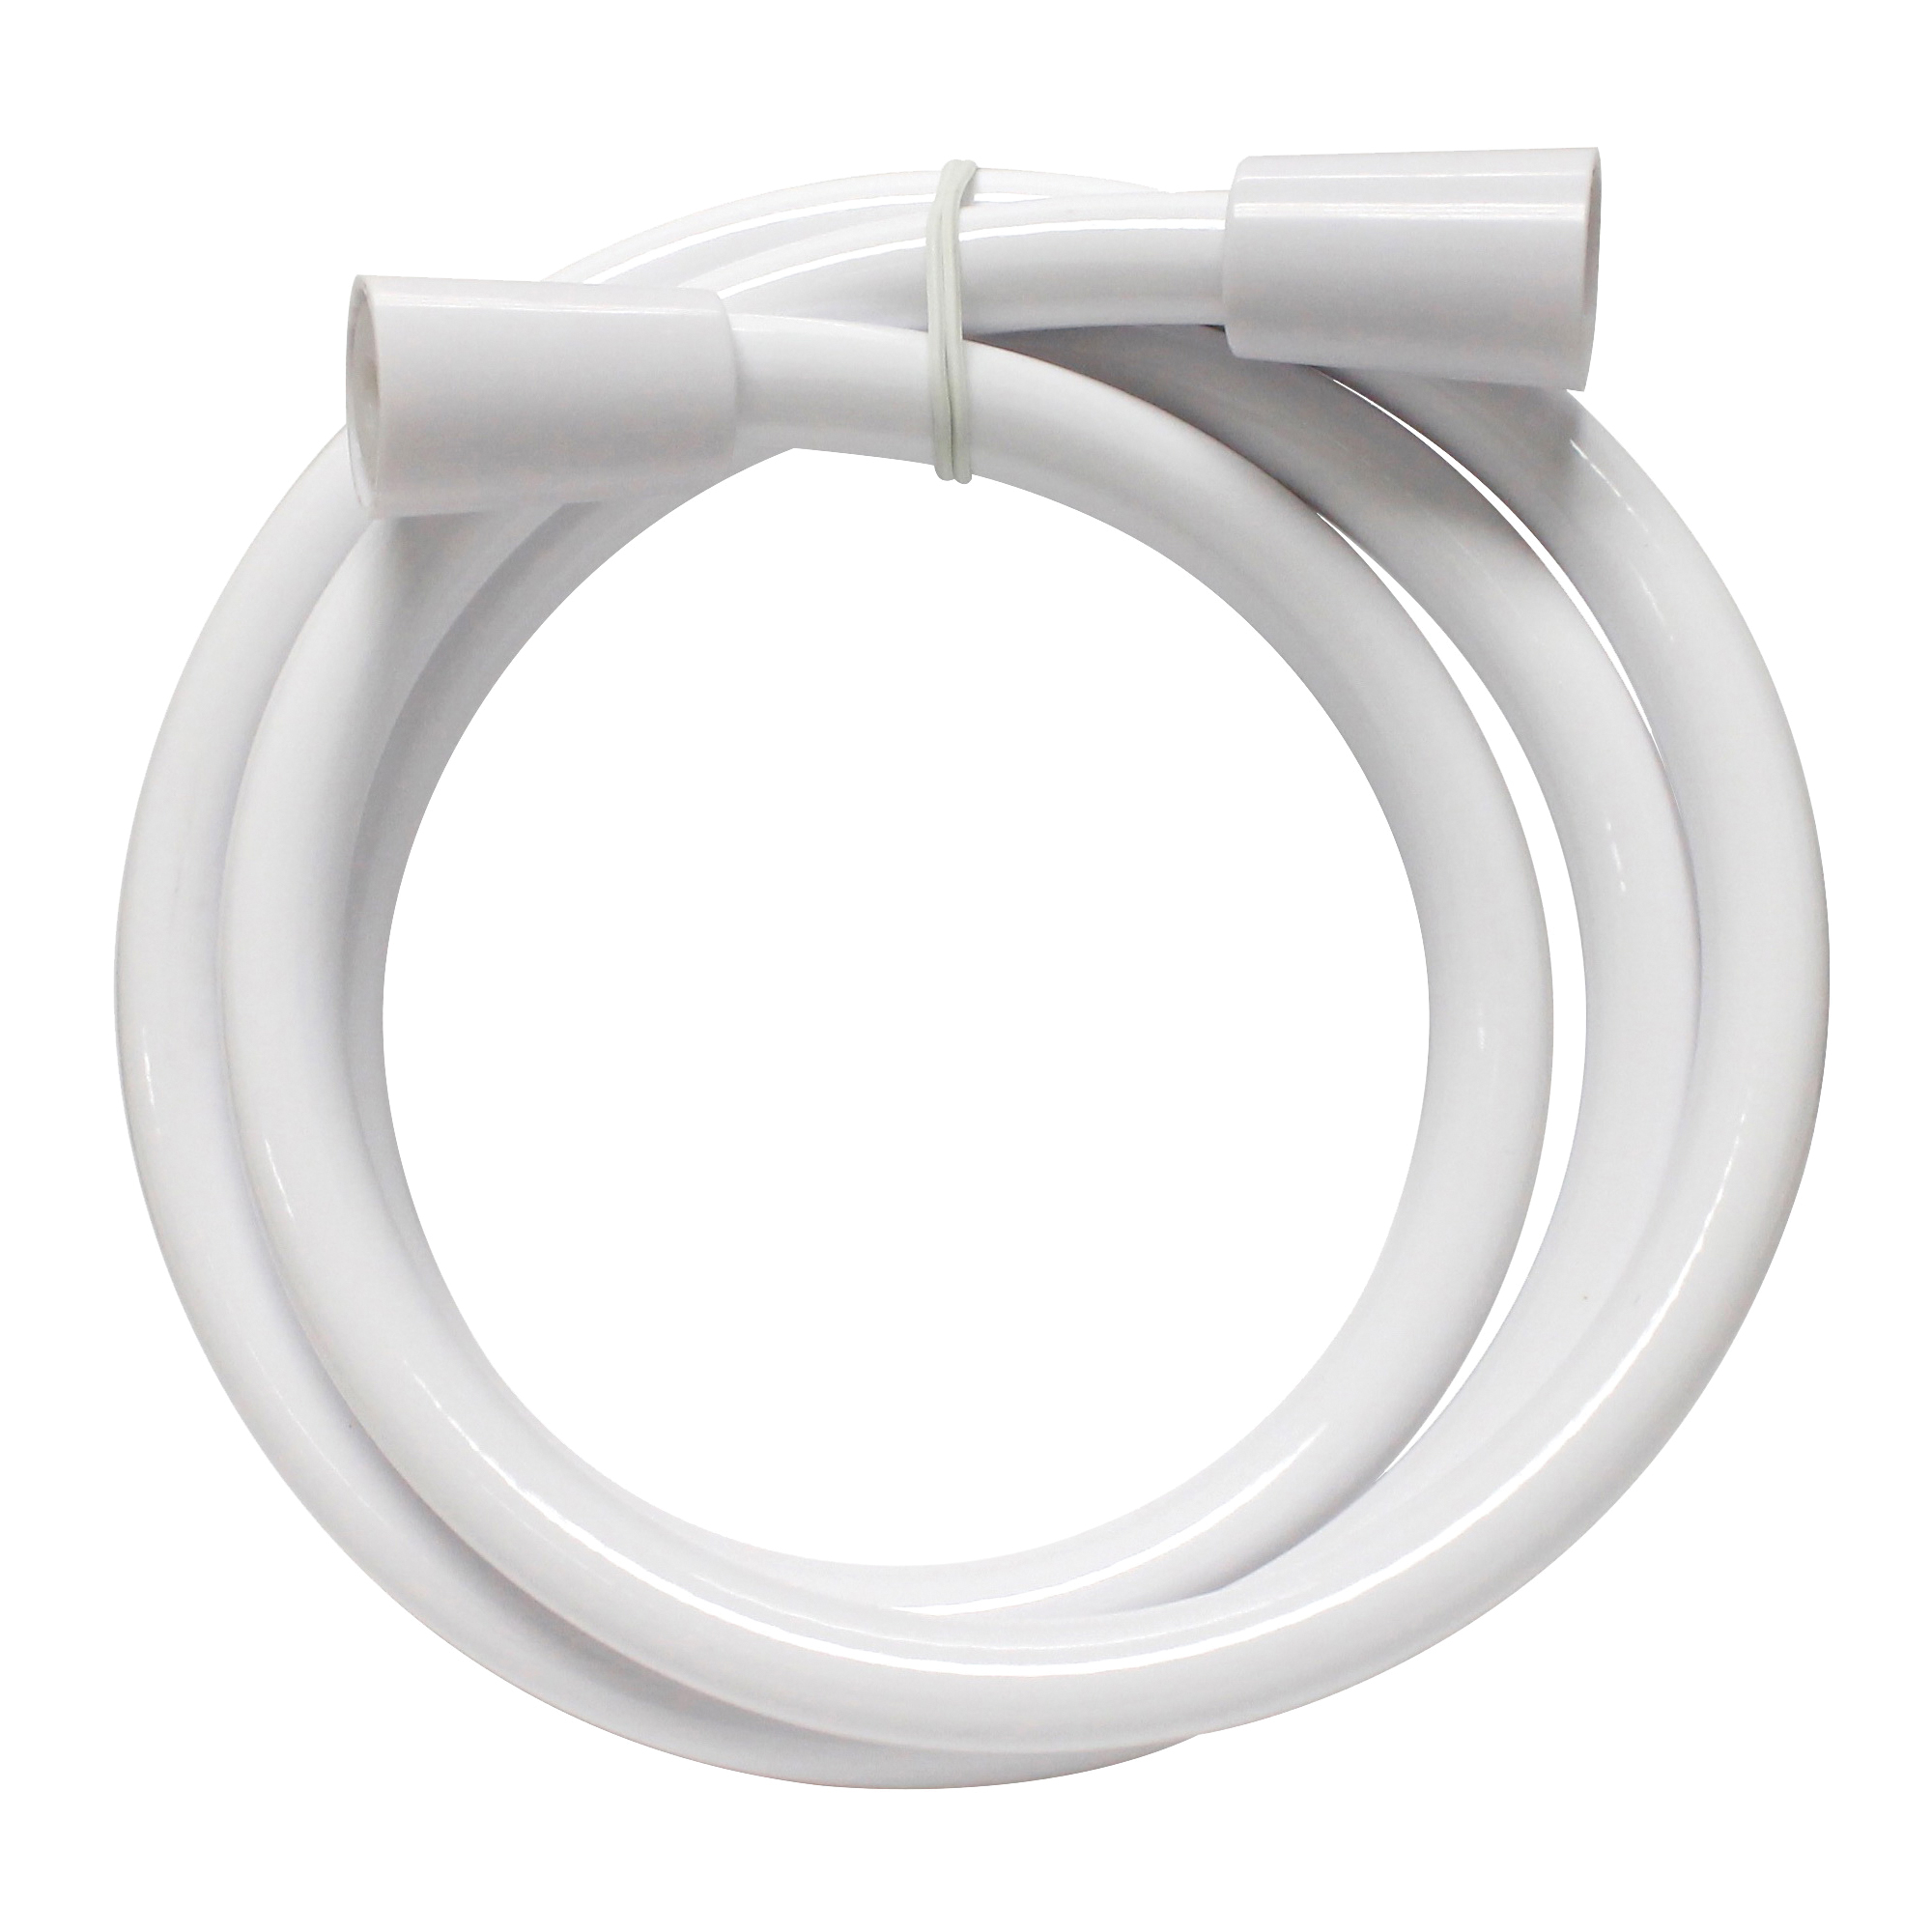 PP825-42W Replacement Shower Hose, 60 in L Hose, Vinyl